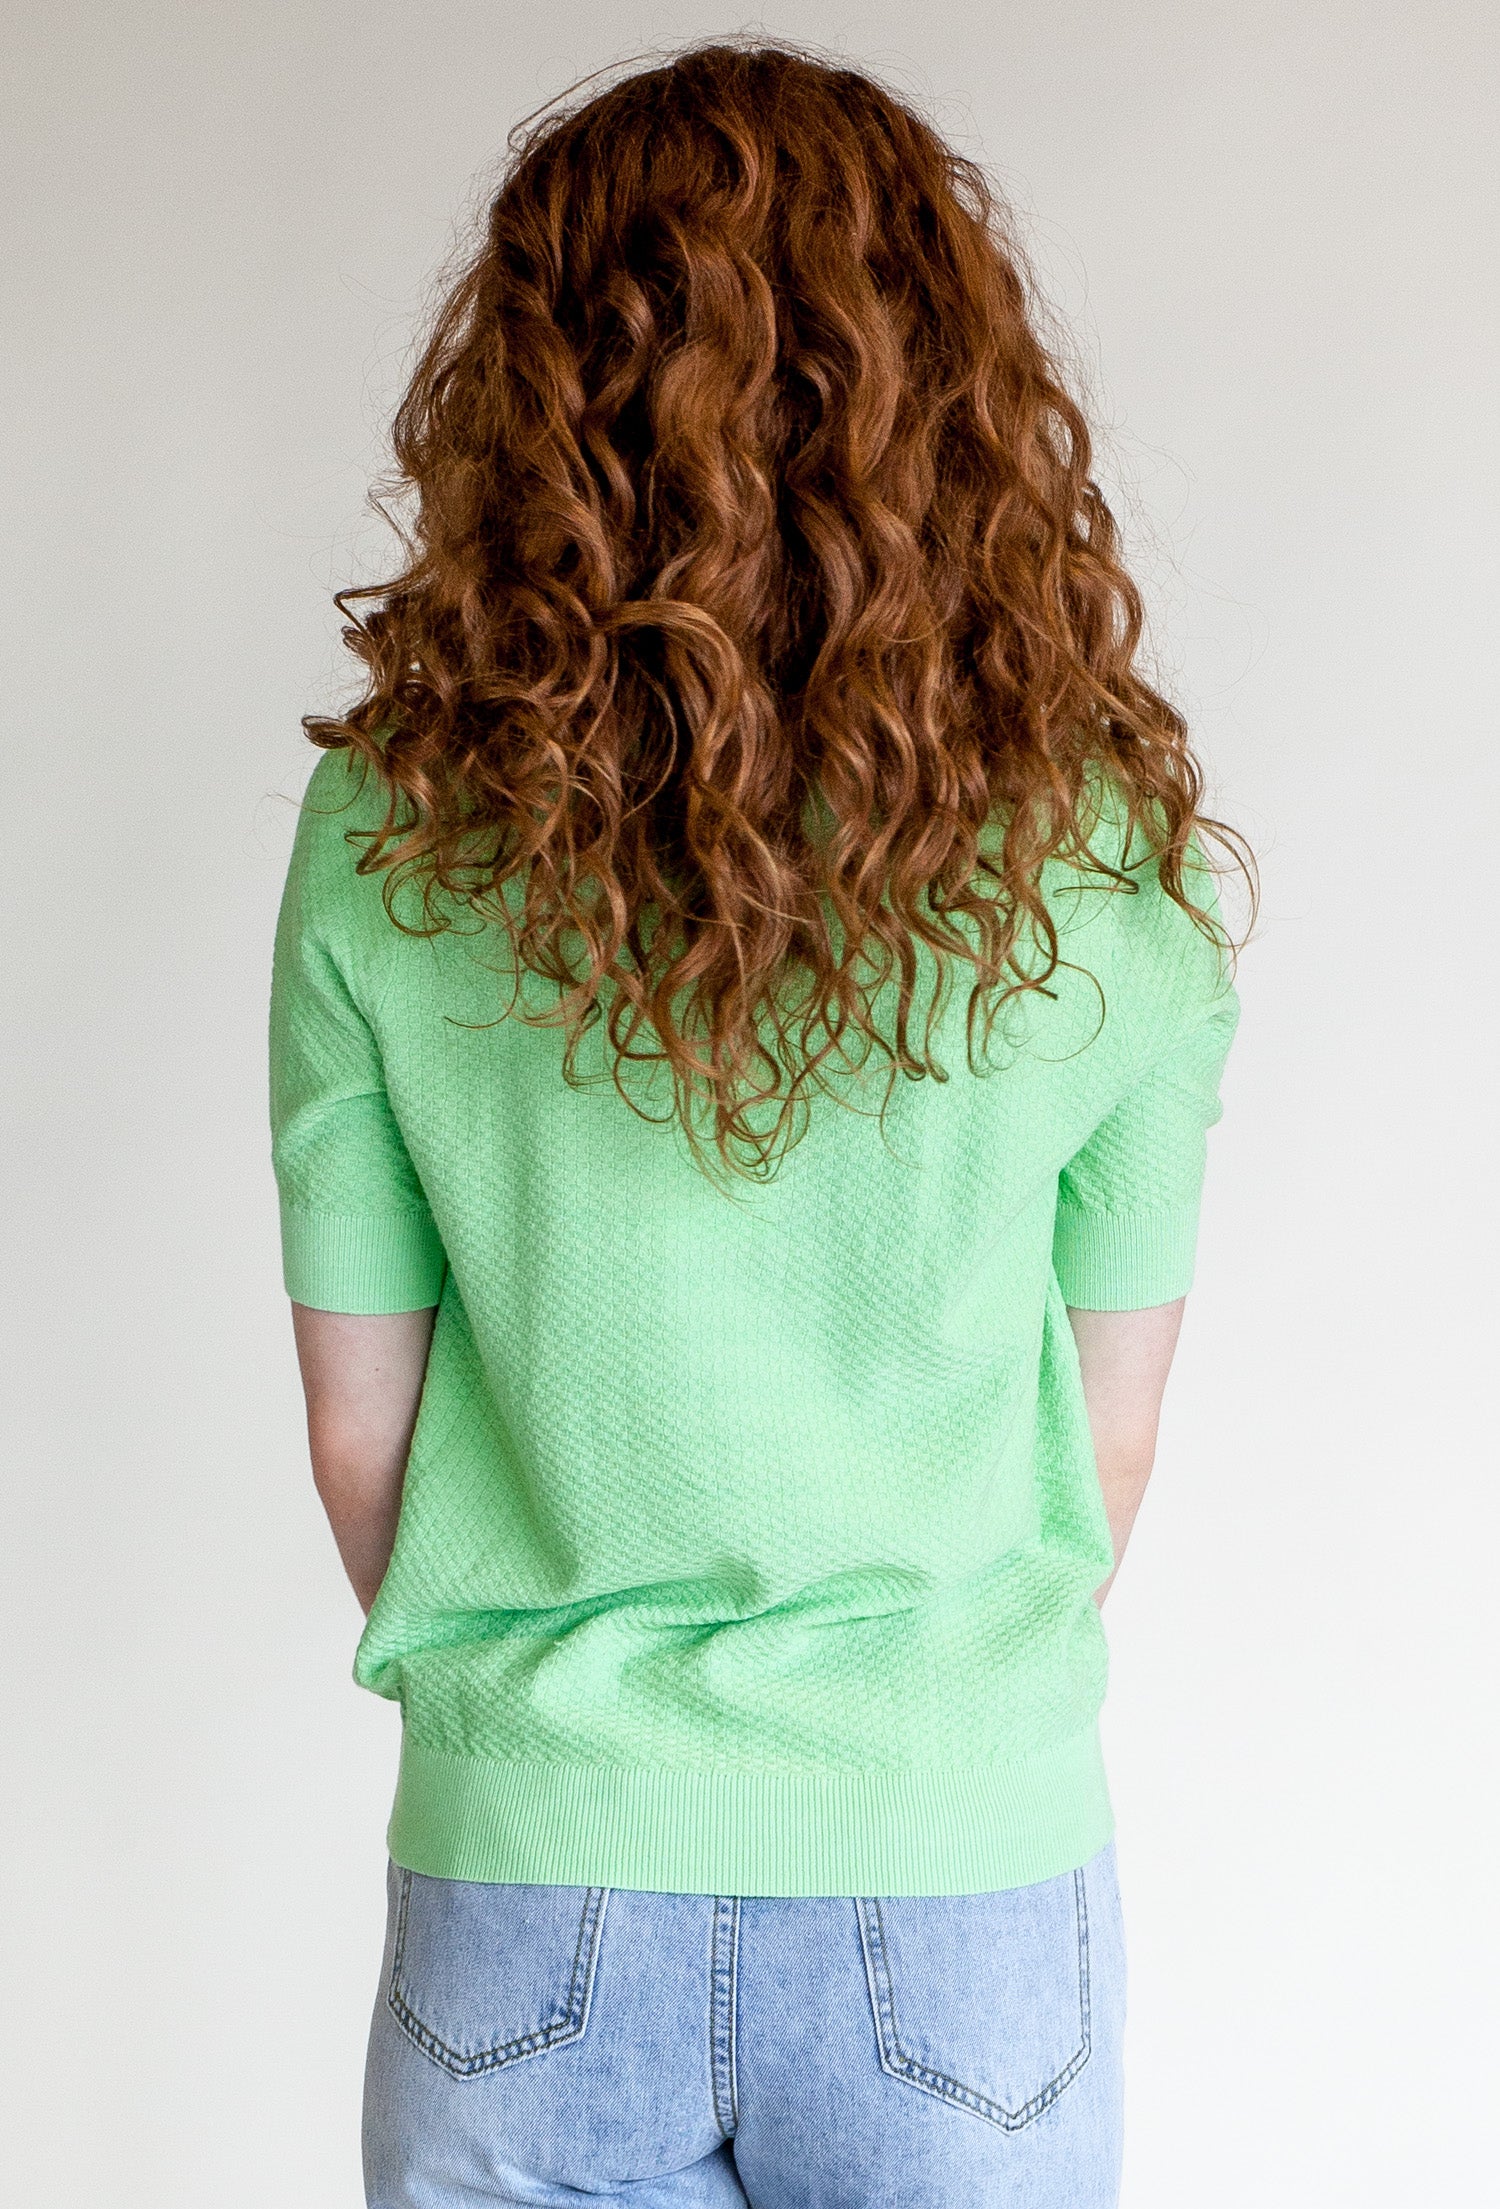 Polo Top Green - Pink Martini Collection